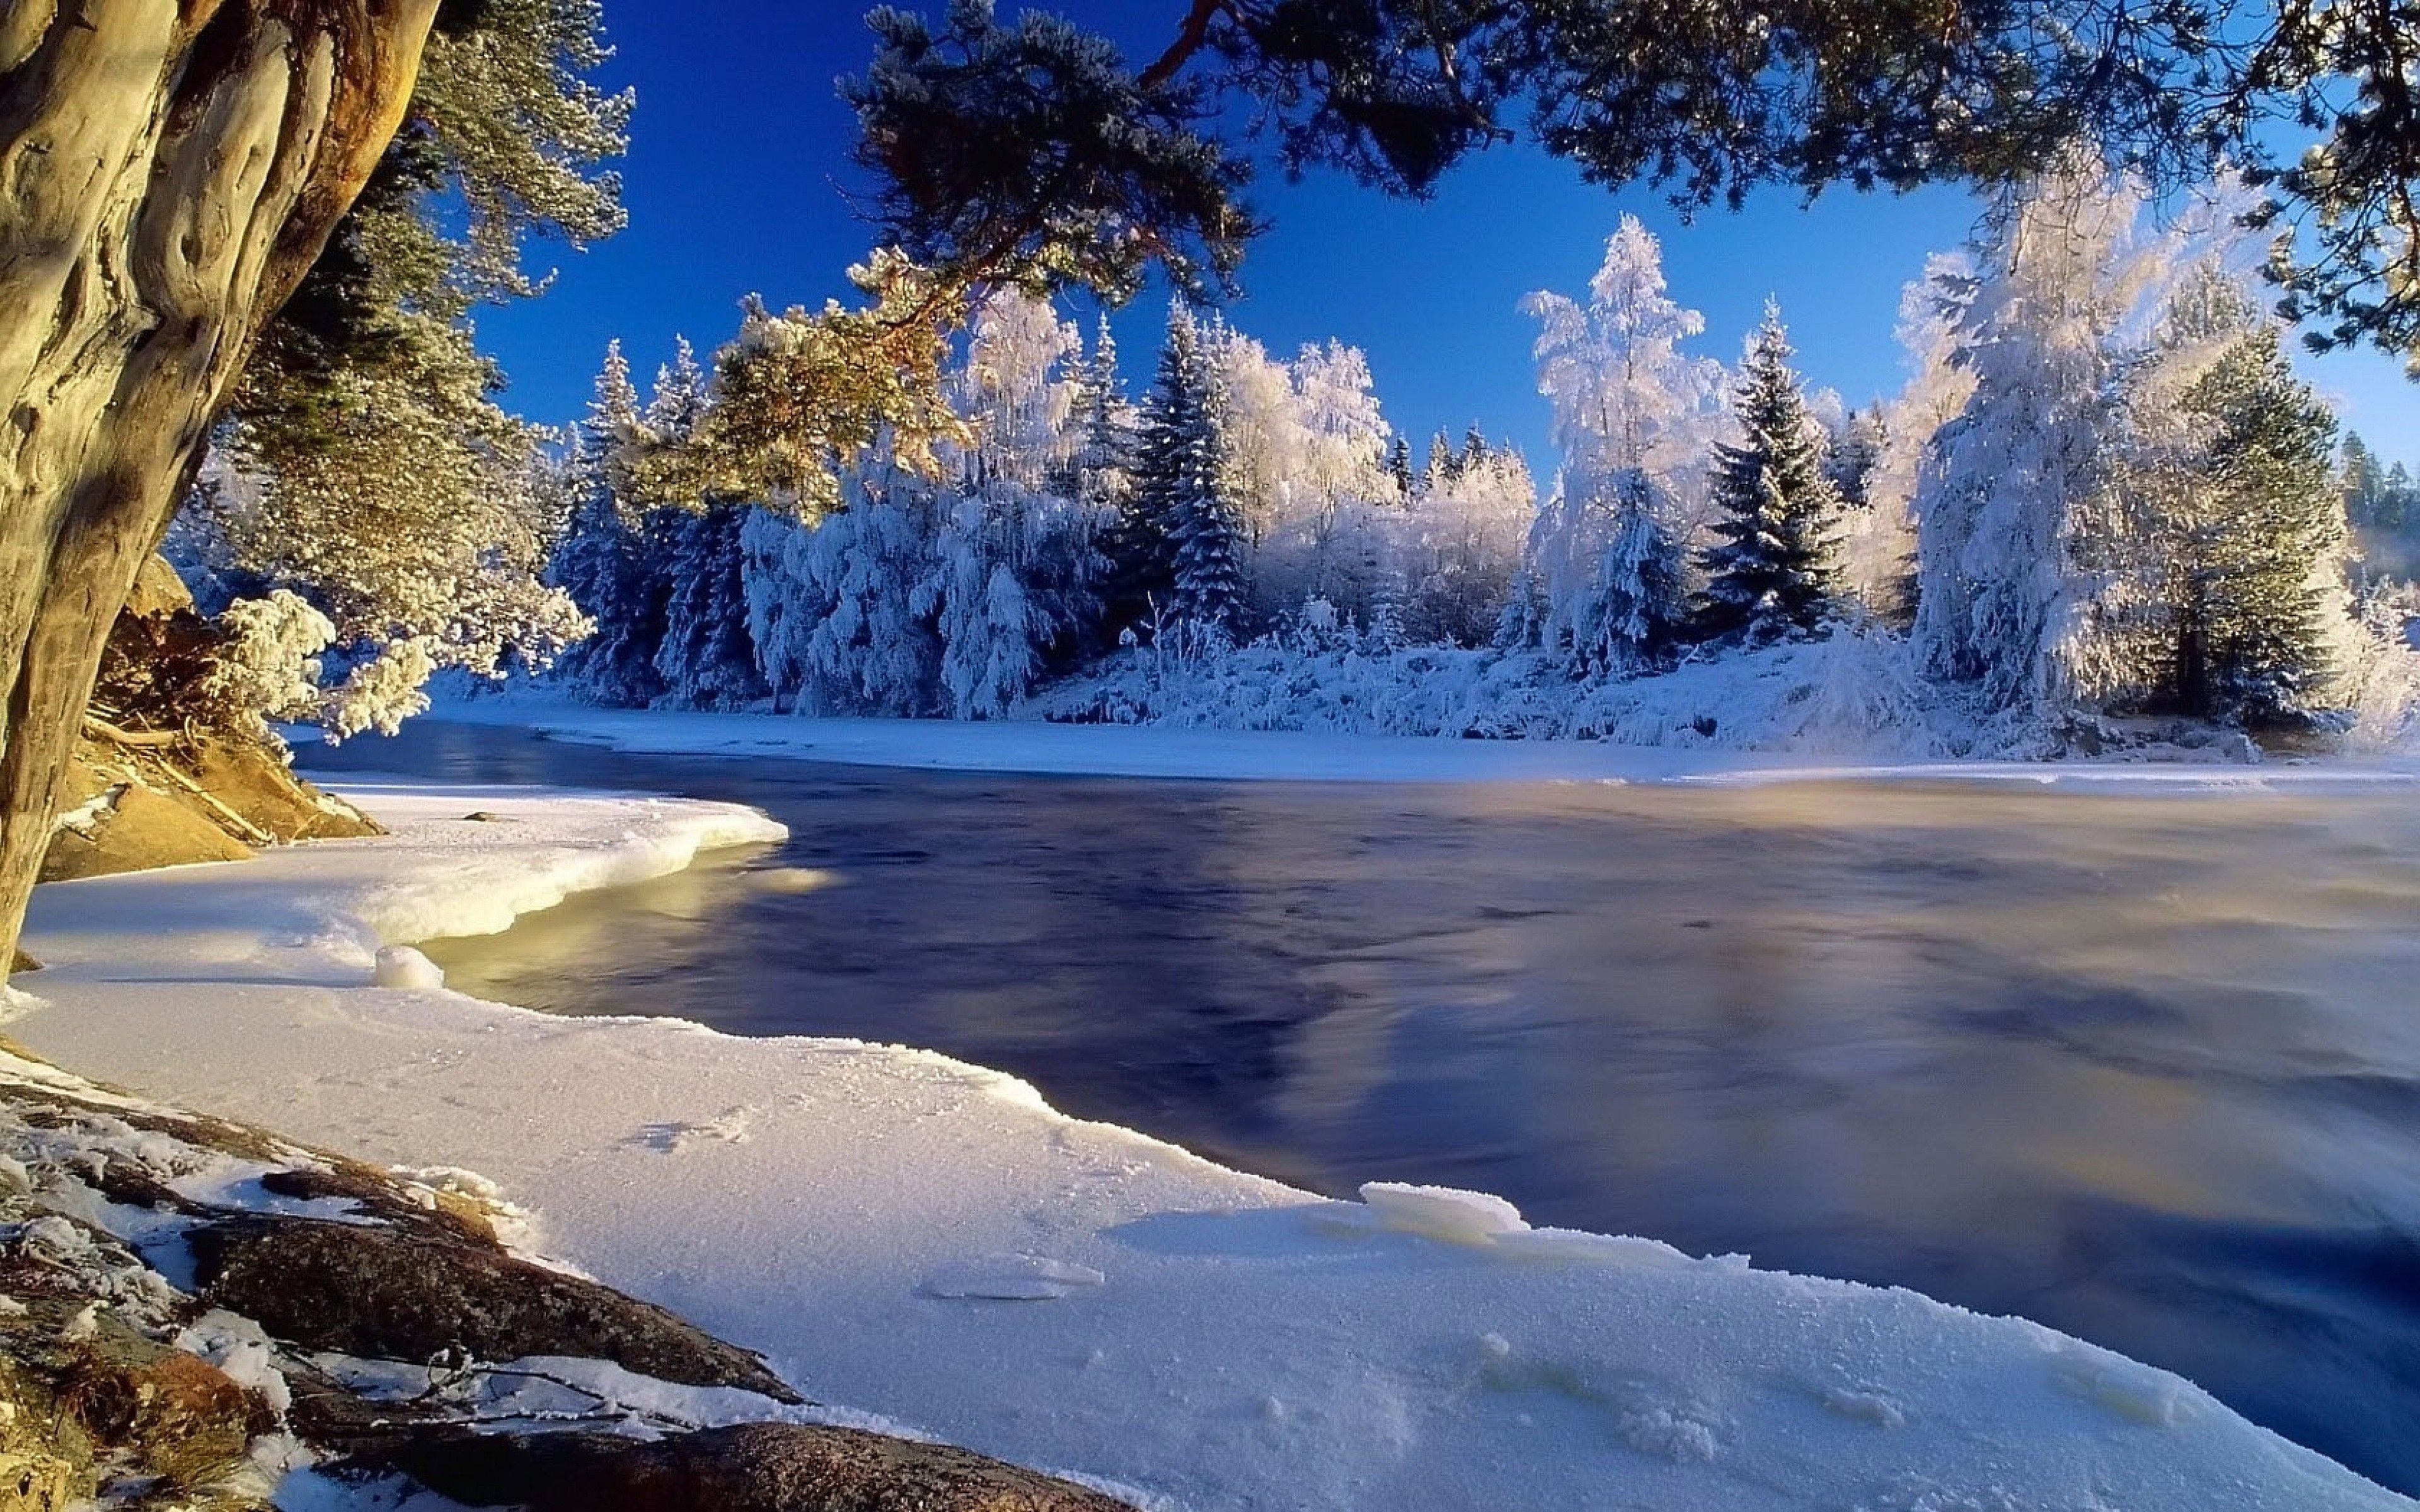 Winter Day wallpaper. Download wide wallpaper beautiful wildlife for ios. Winter, snow, trees